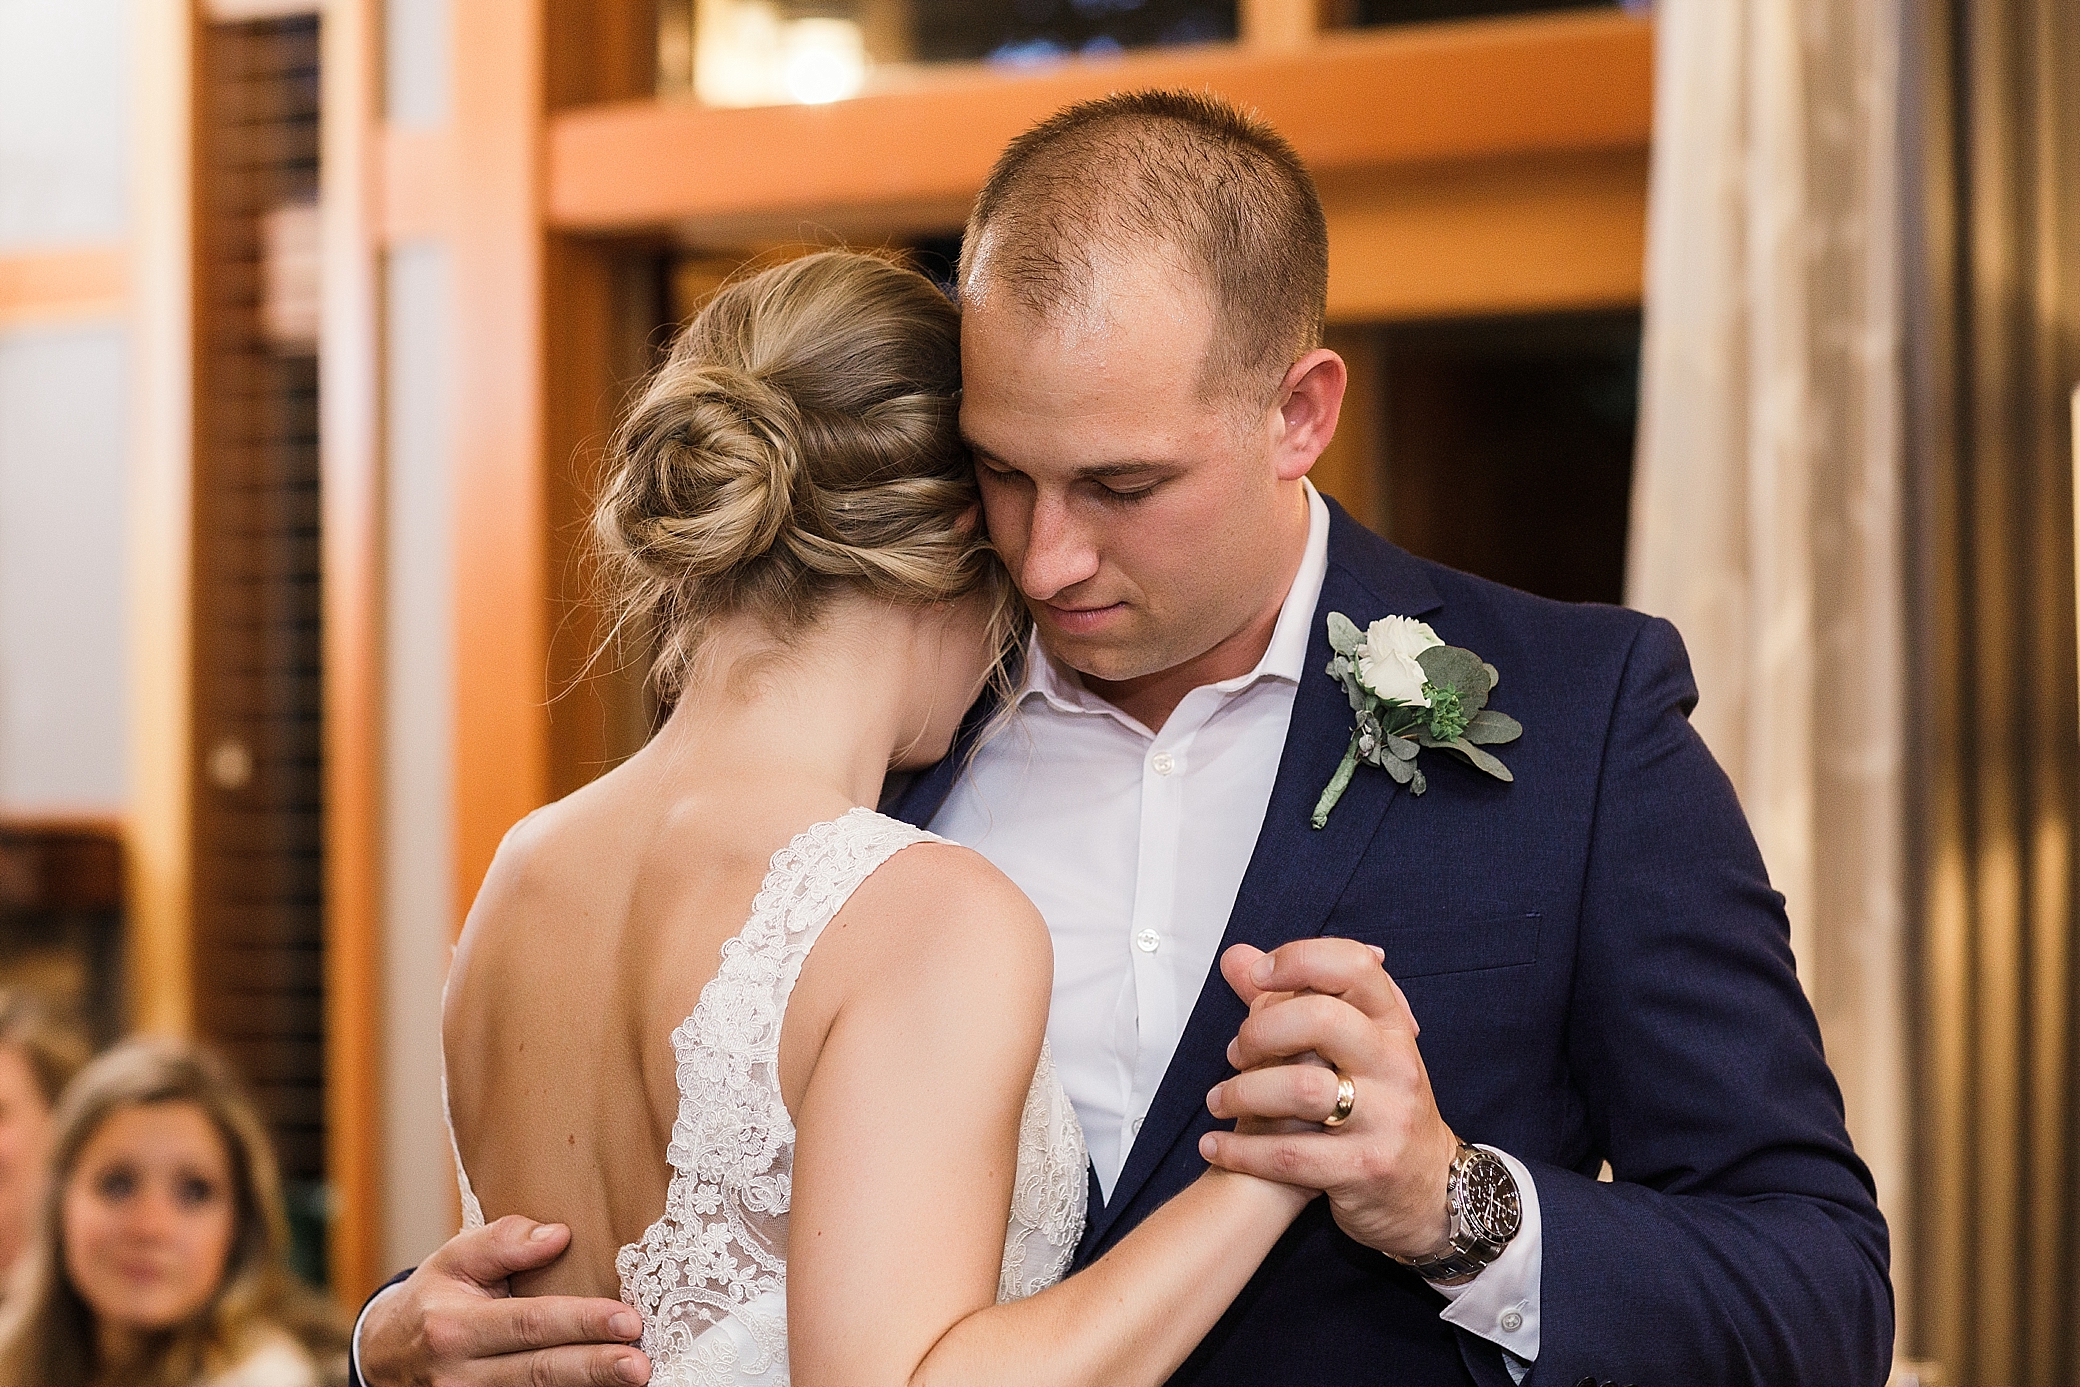 Emotional first dance at Intimate Woodinville Wedding | Megan Montalvo Photography